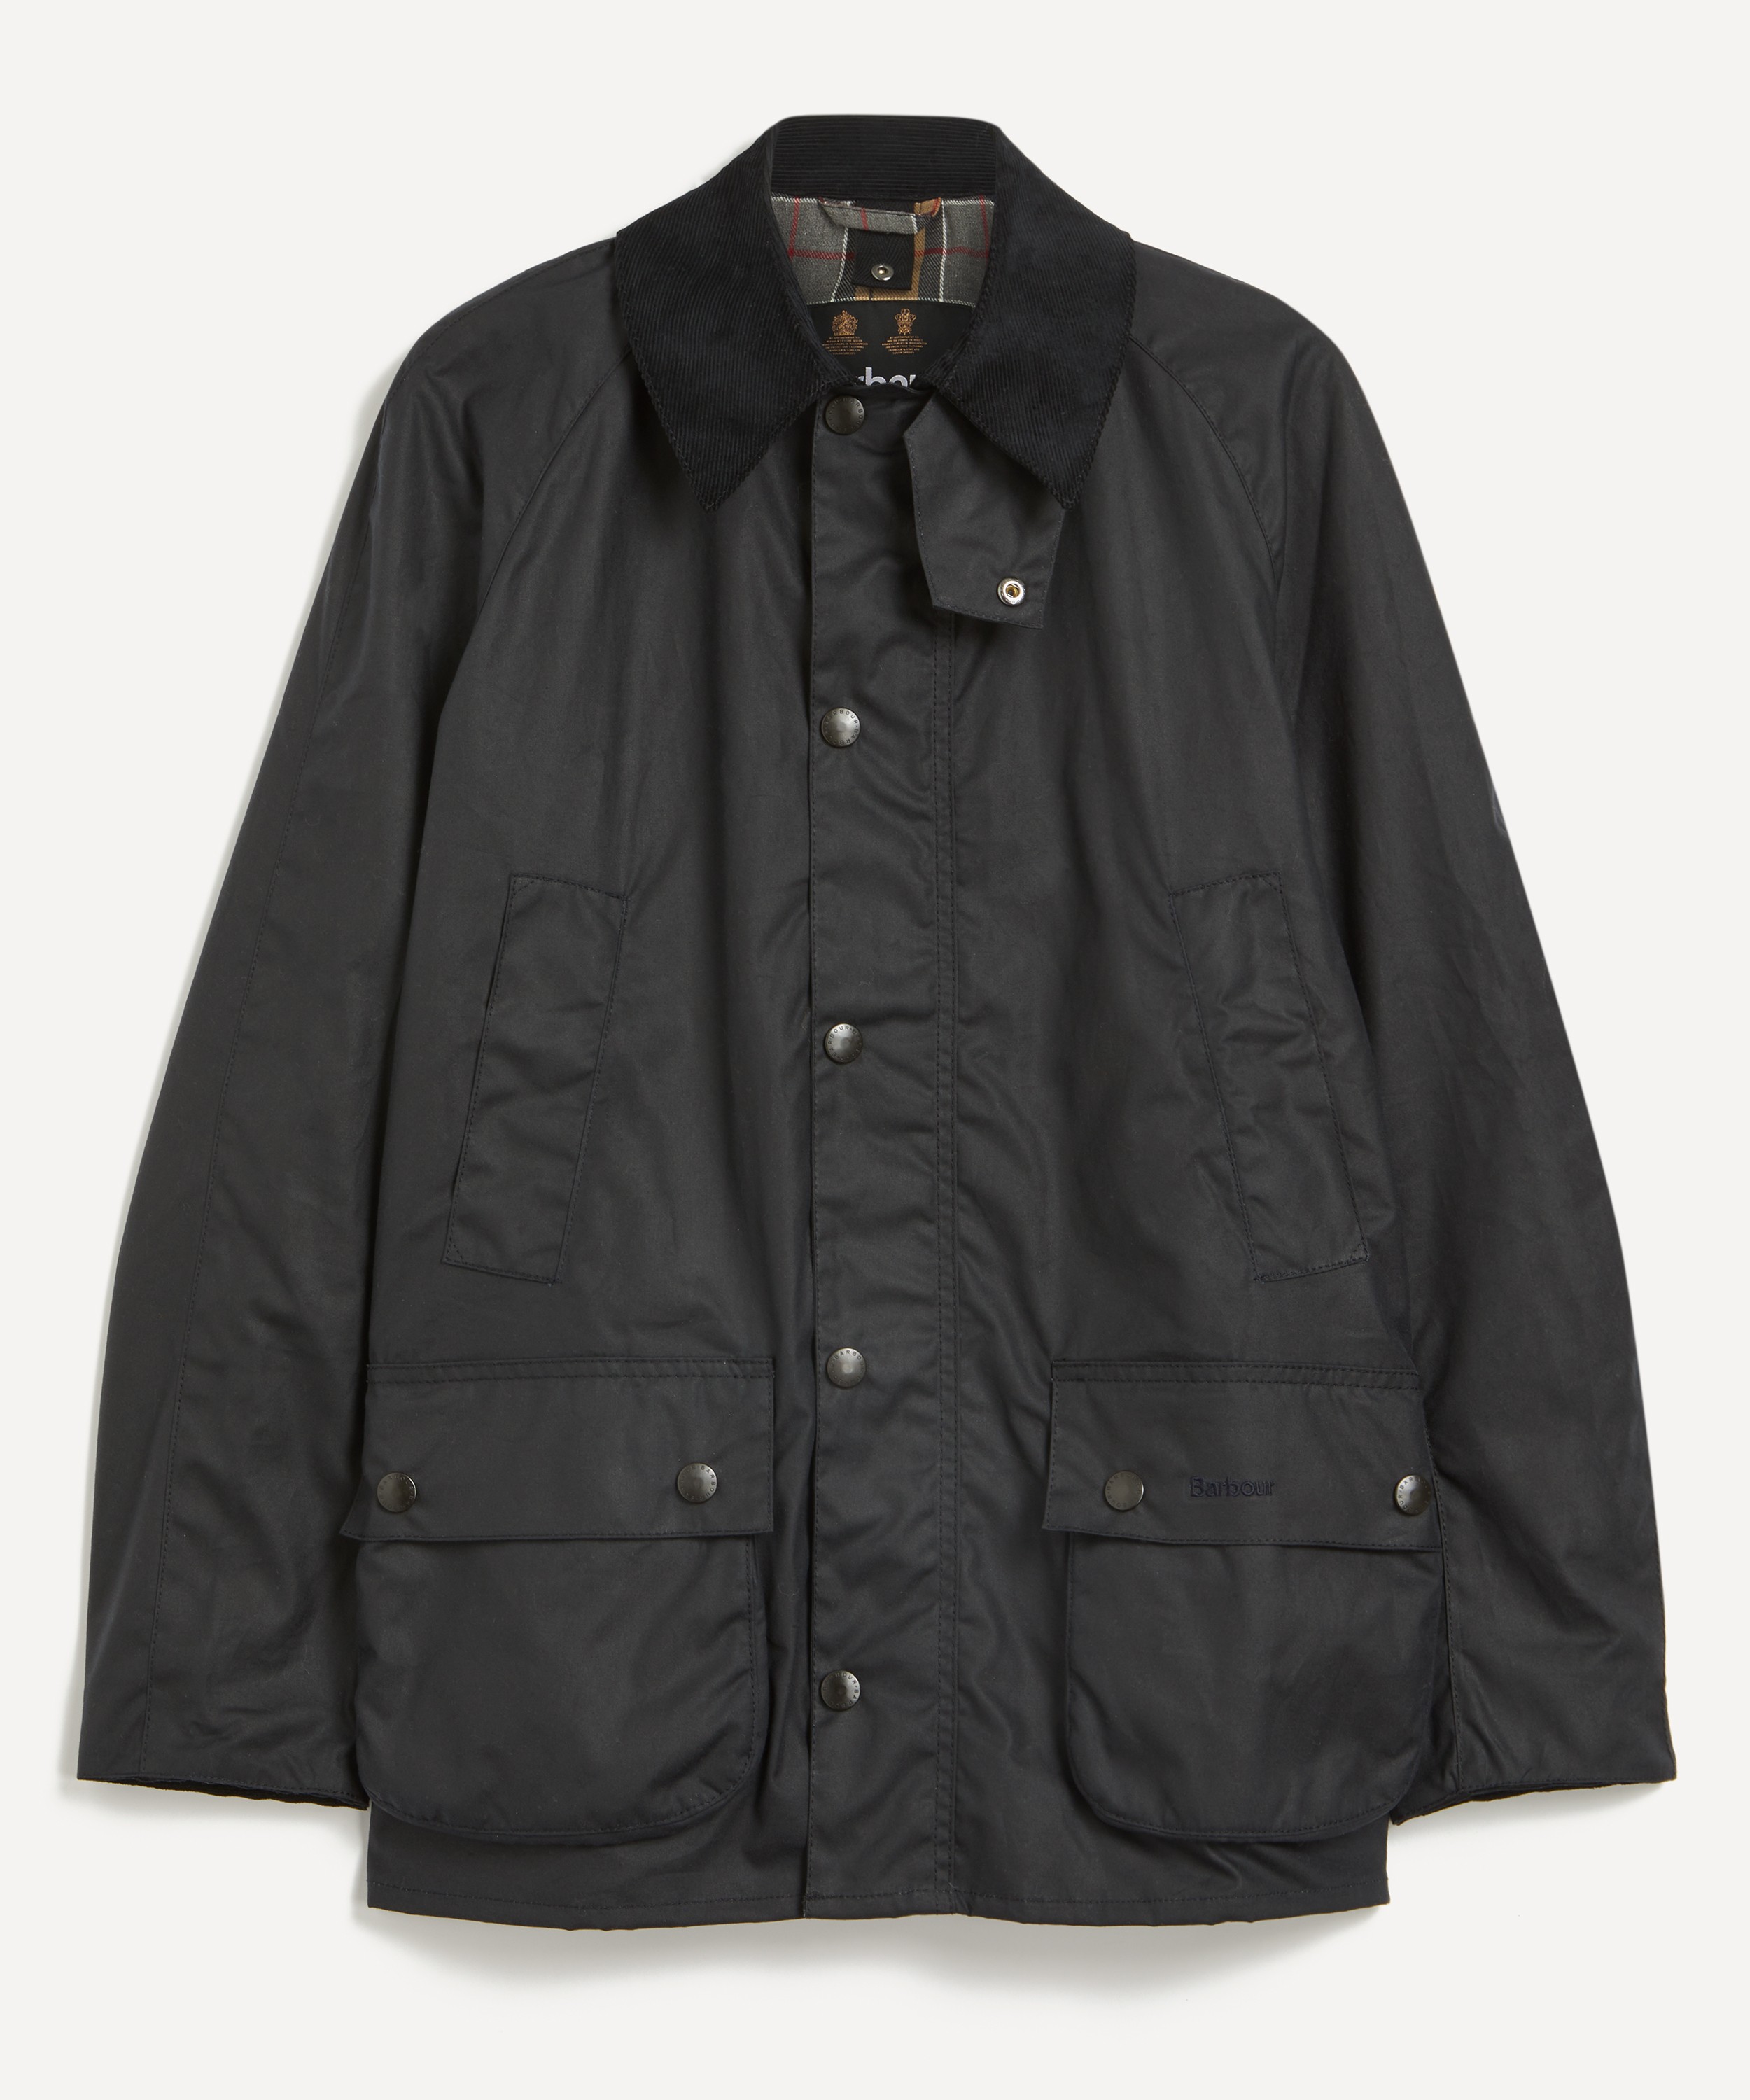 Barbour - Ashby Navy Waxed Jacket